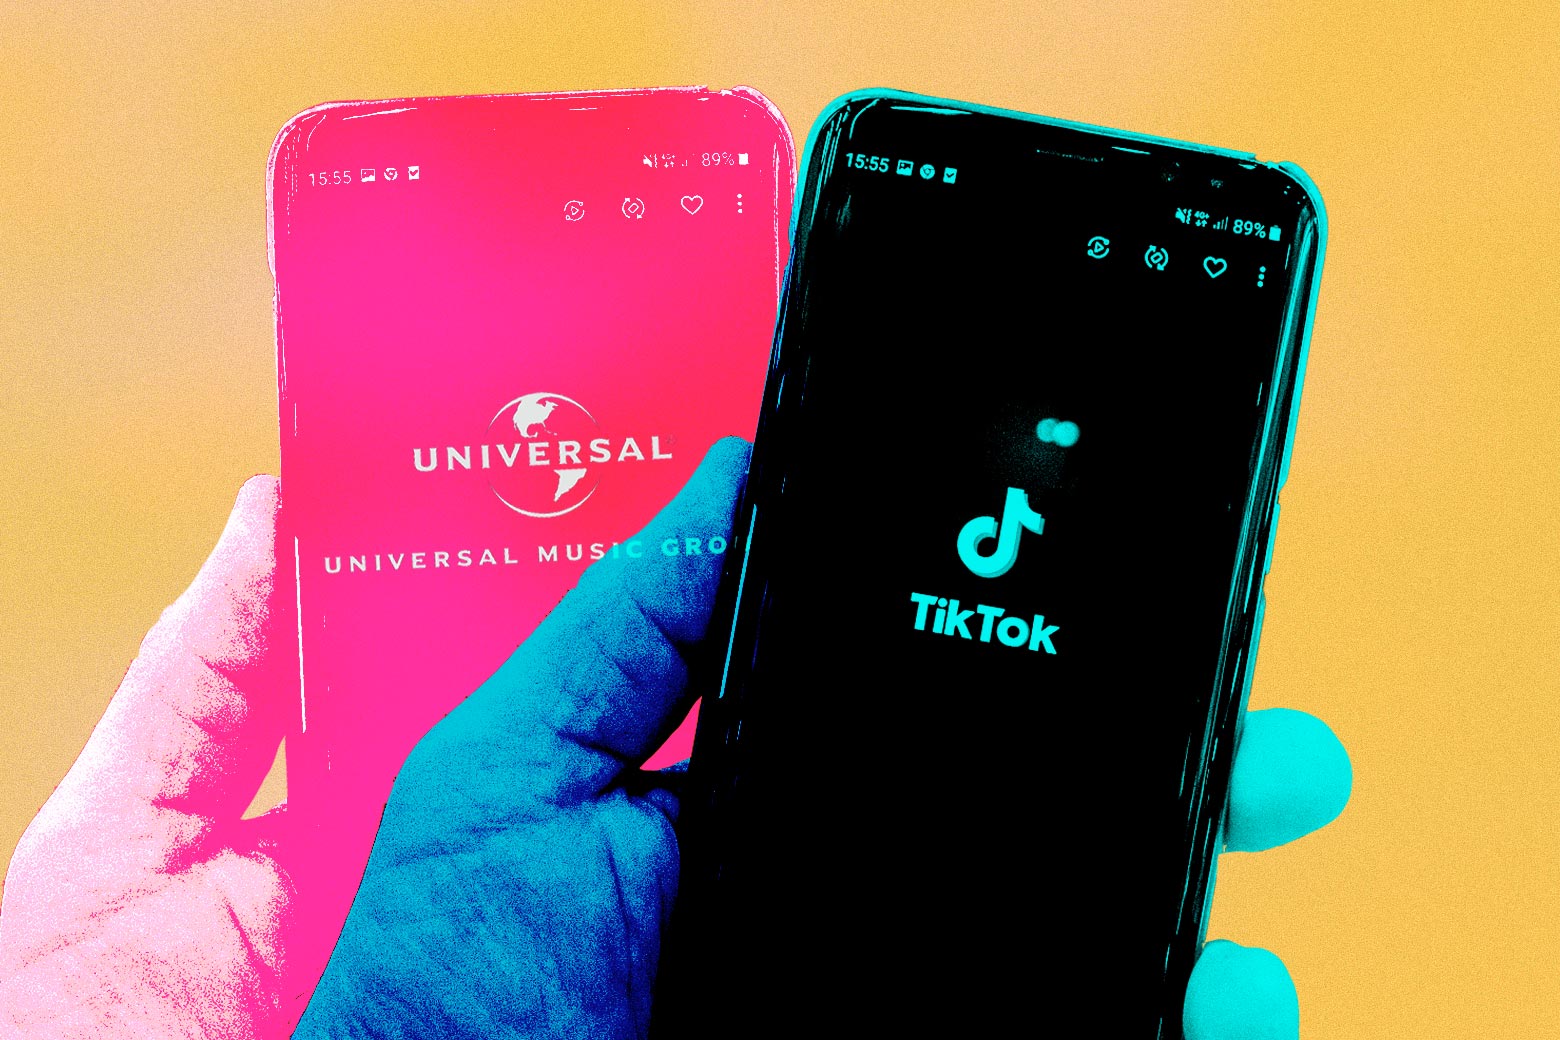 TikTok’s Feud With Universal Is Driven by an Age-Old Worry Scott Nover